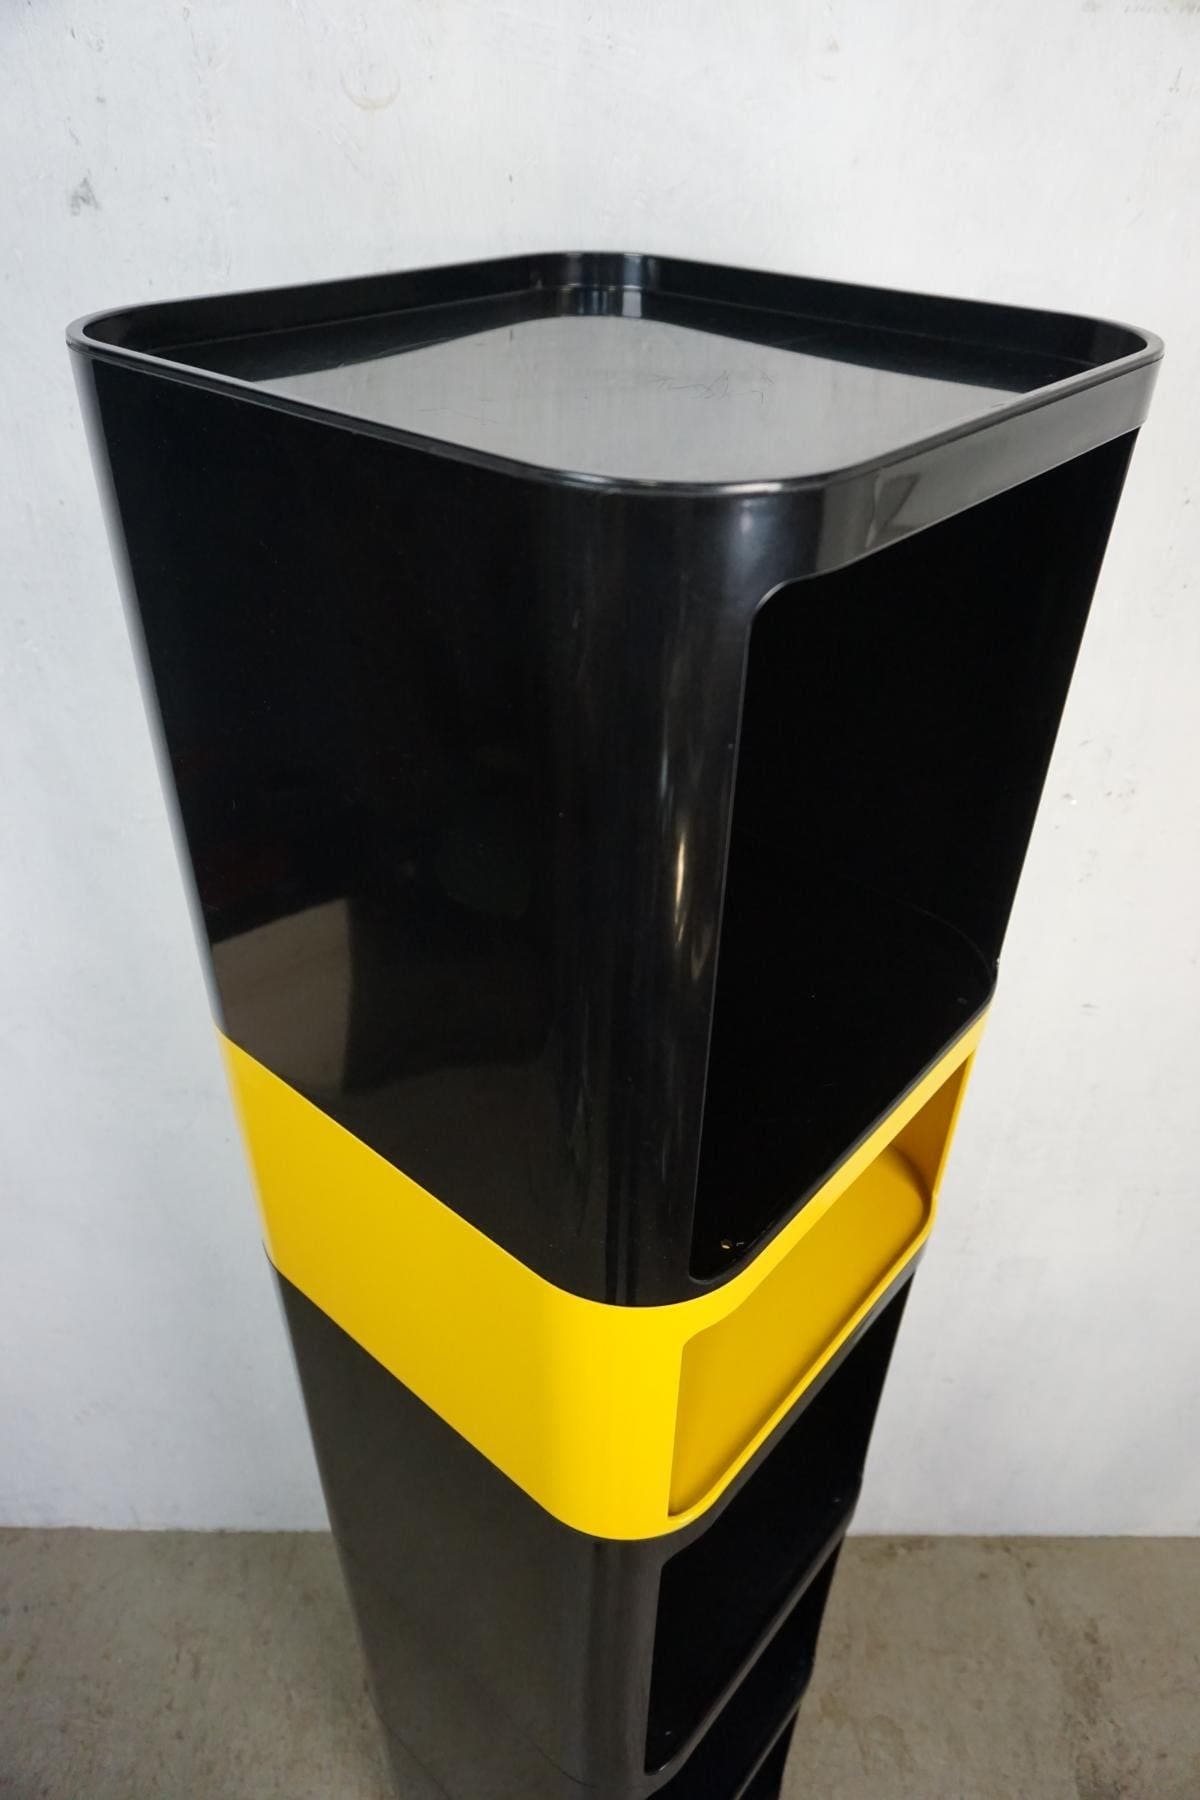 Original Kartell Componibili shelving system in beautiful black and yellow